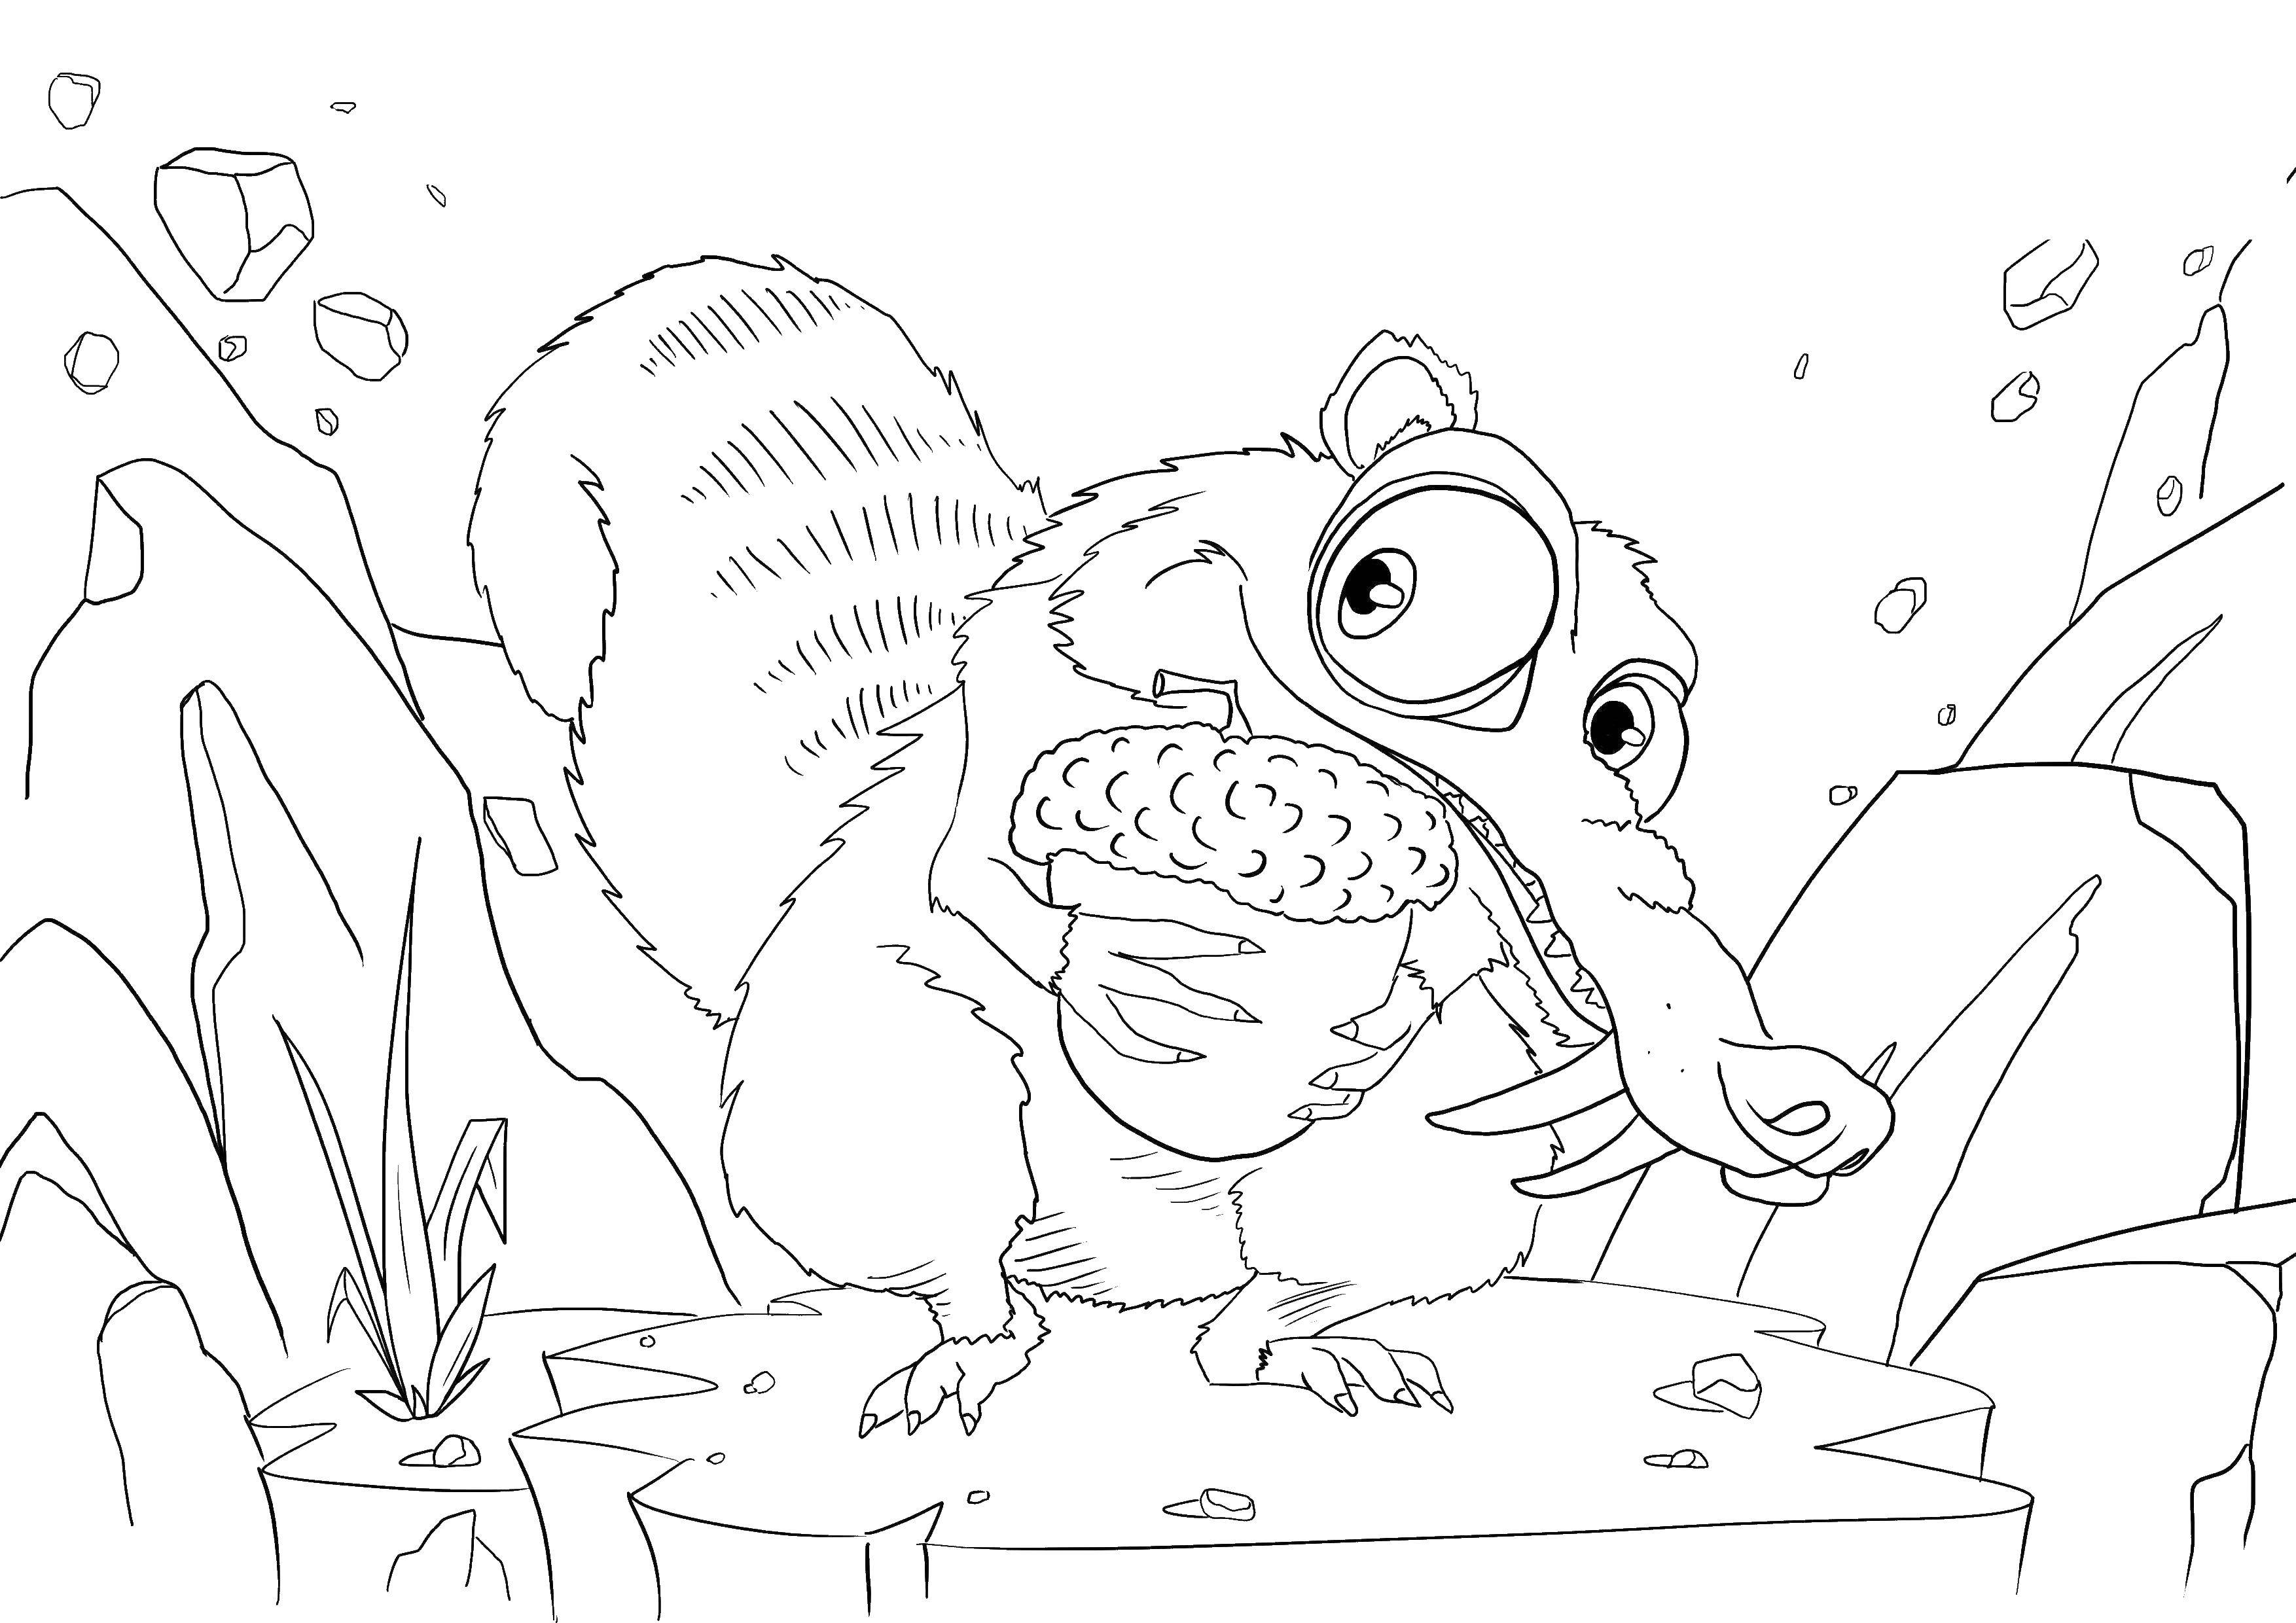 Coloring Squirrel found a nut. Category ice age. Tags:  squirrel, ice age.